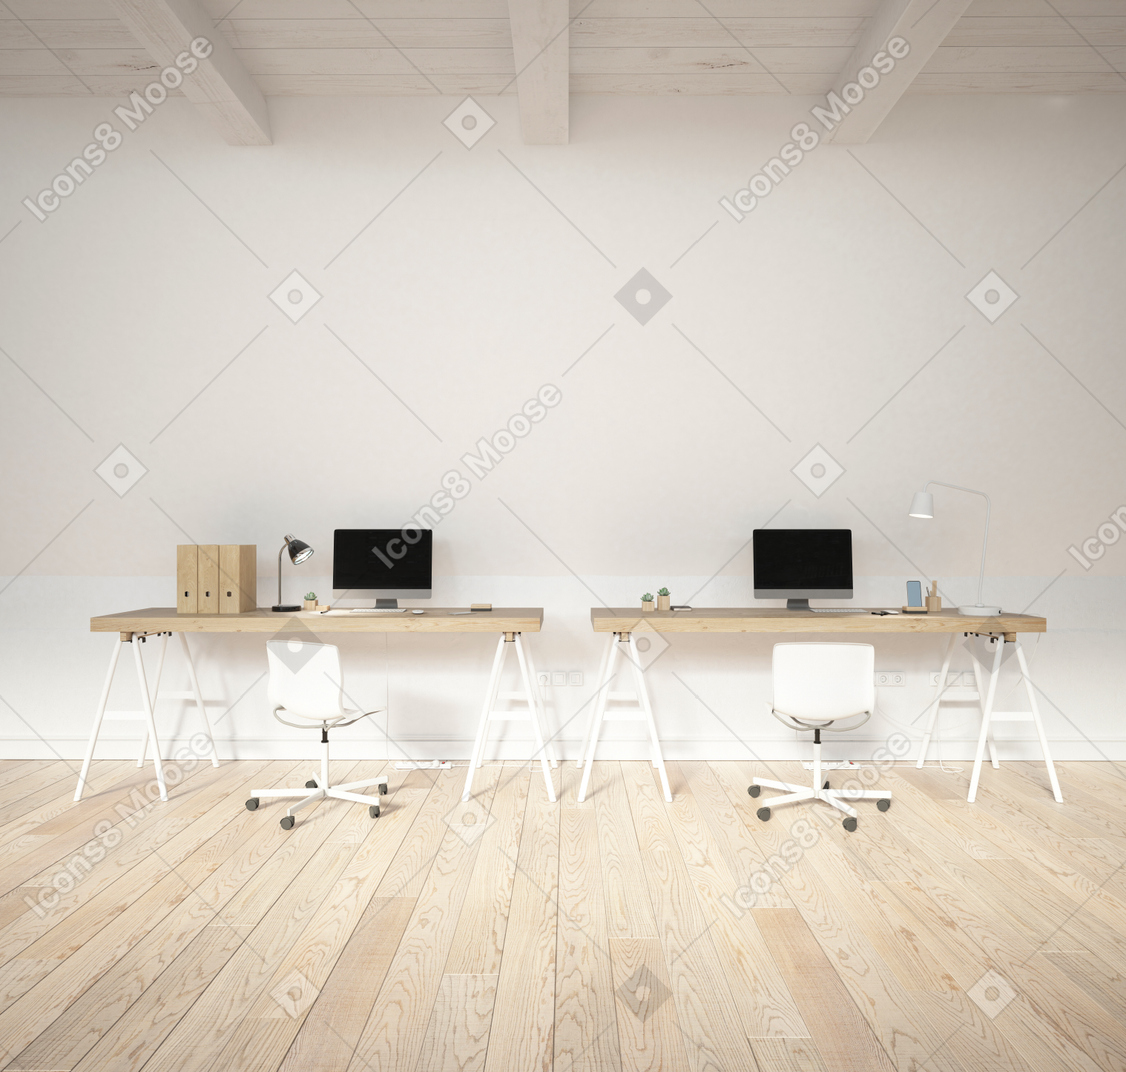 Office space with computer equipment and stationery